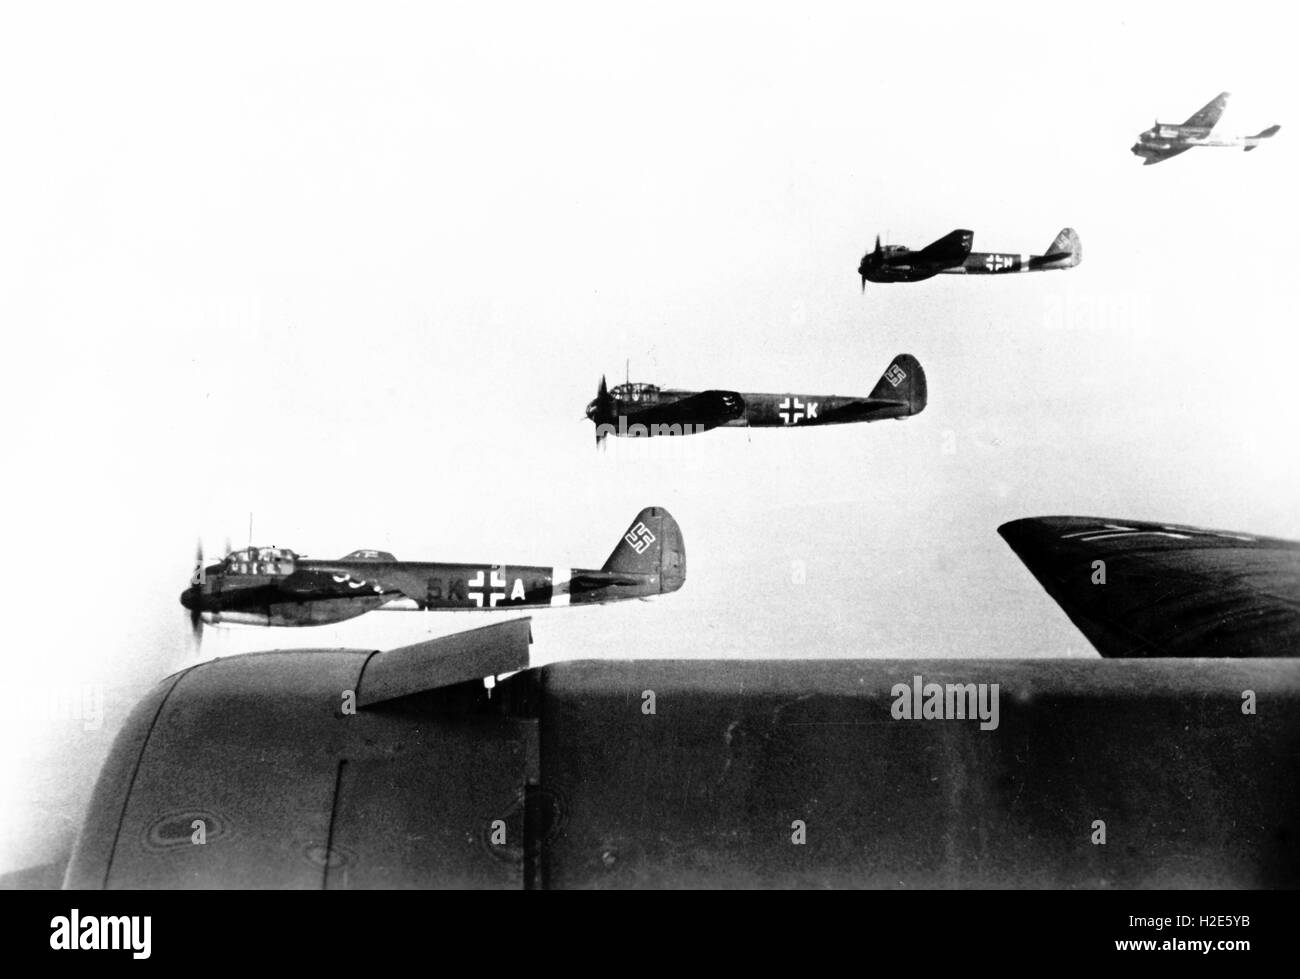 The Nazi propaganda image depicts combat aircraft, type Junker Ju 88 on the Eastern Front. The photo was published in July 1942. Fotoarchiv für Zeitgeschichte - NO WIRE SERVICE -  | usage worldwide Stock Photo